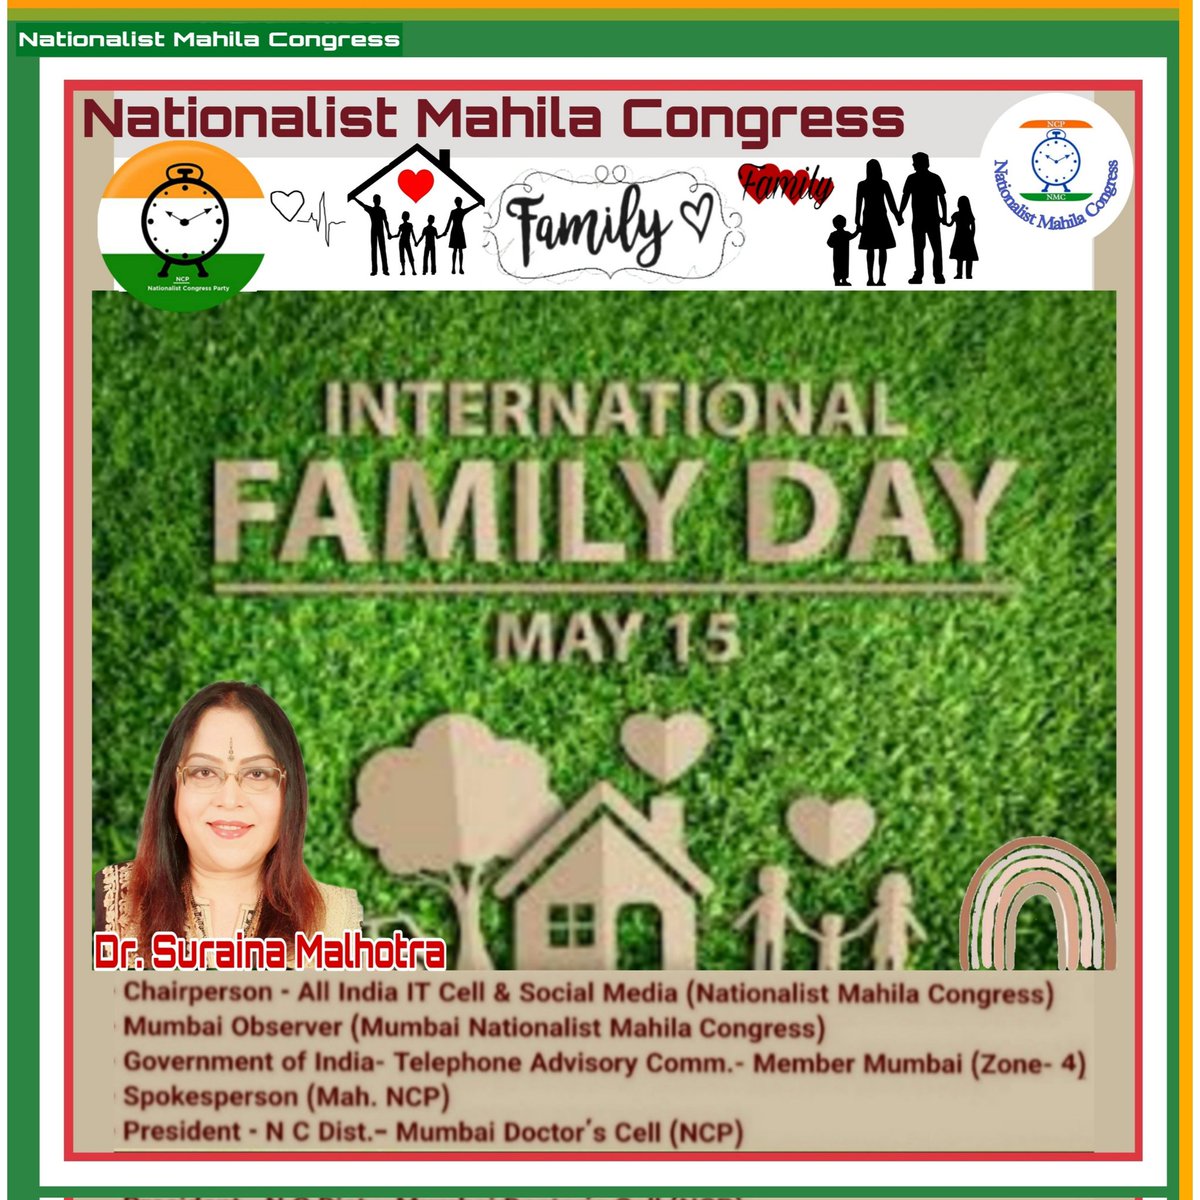 #HappyInternationalDayOfFamilies Every year on May 15, the #InternationalDayOfFamilies  is observed to highlight the value of families and their major contribution to society.
@PawarSpeaks @DrFauziaKhanNCP @NCPspeaks @NCP_NMCspeaks @MumbaiNCP @AnilDeshmukhNCP 
@Dwalsepatil